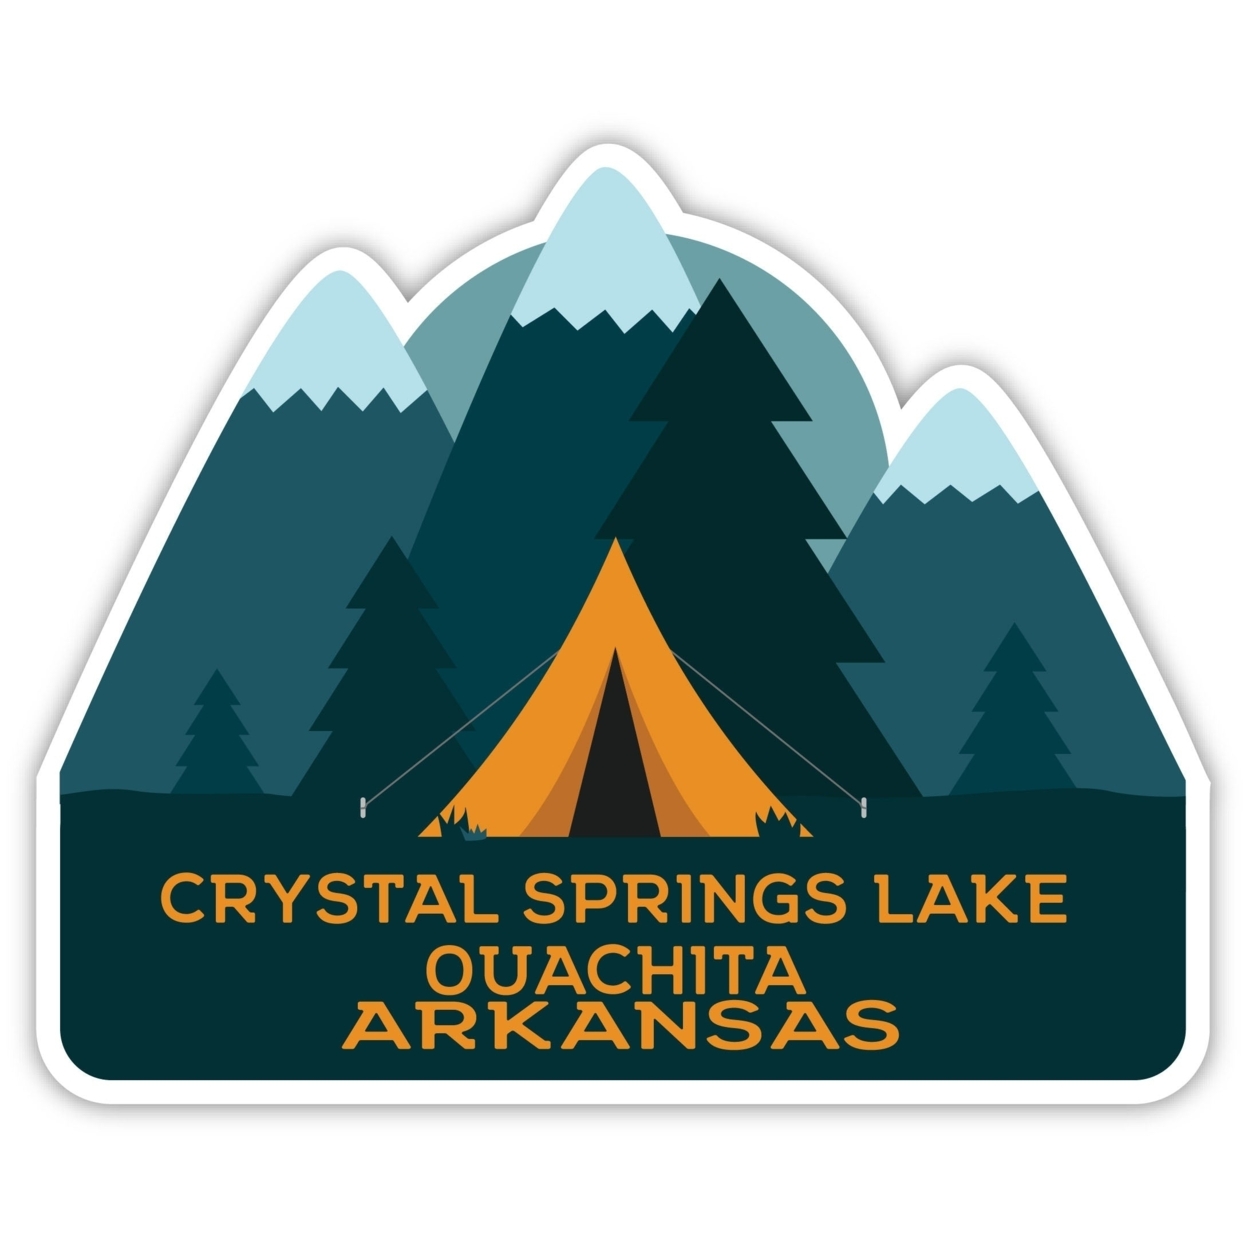 Crystal Springs Lake Ouachita Arkansas Souvenir Decorative Stickers (Choose Theme And Size) - 4-Pack, 6-Inch, Tent